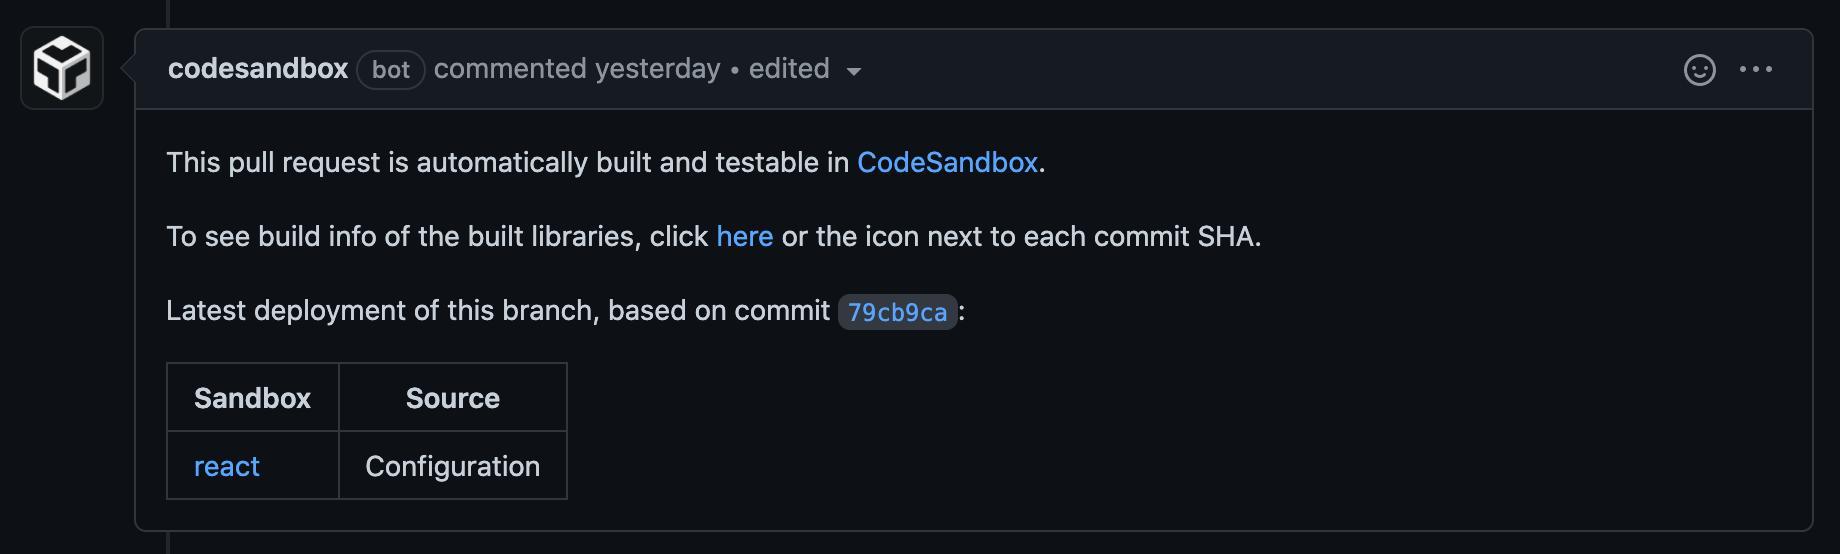 CodeSandbox comment on pull request